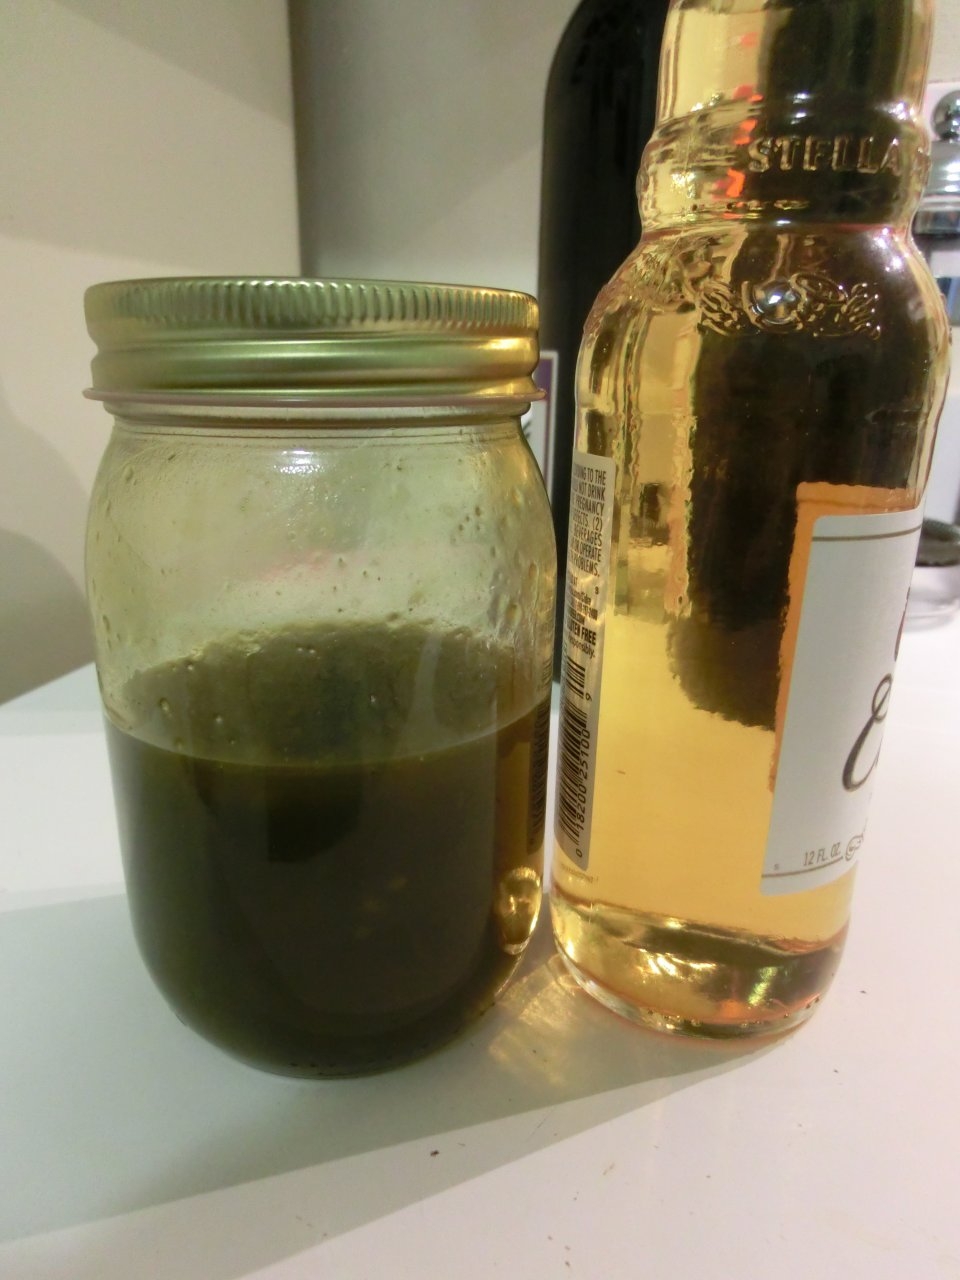 grapeseedoil infused with Zamaldelica